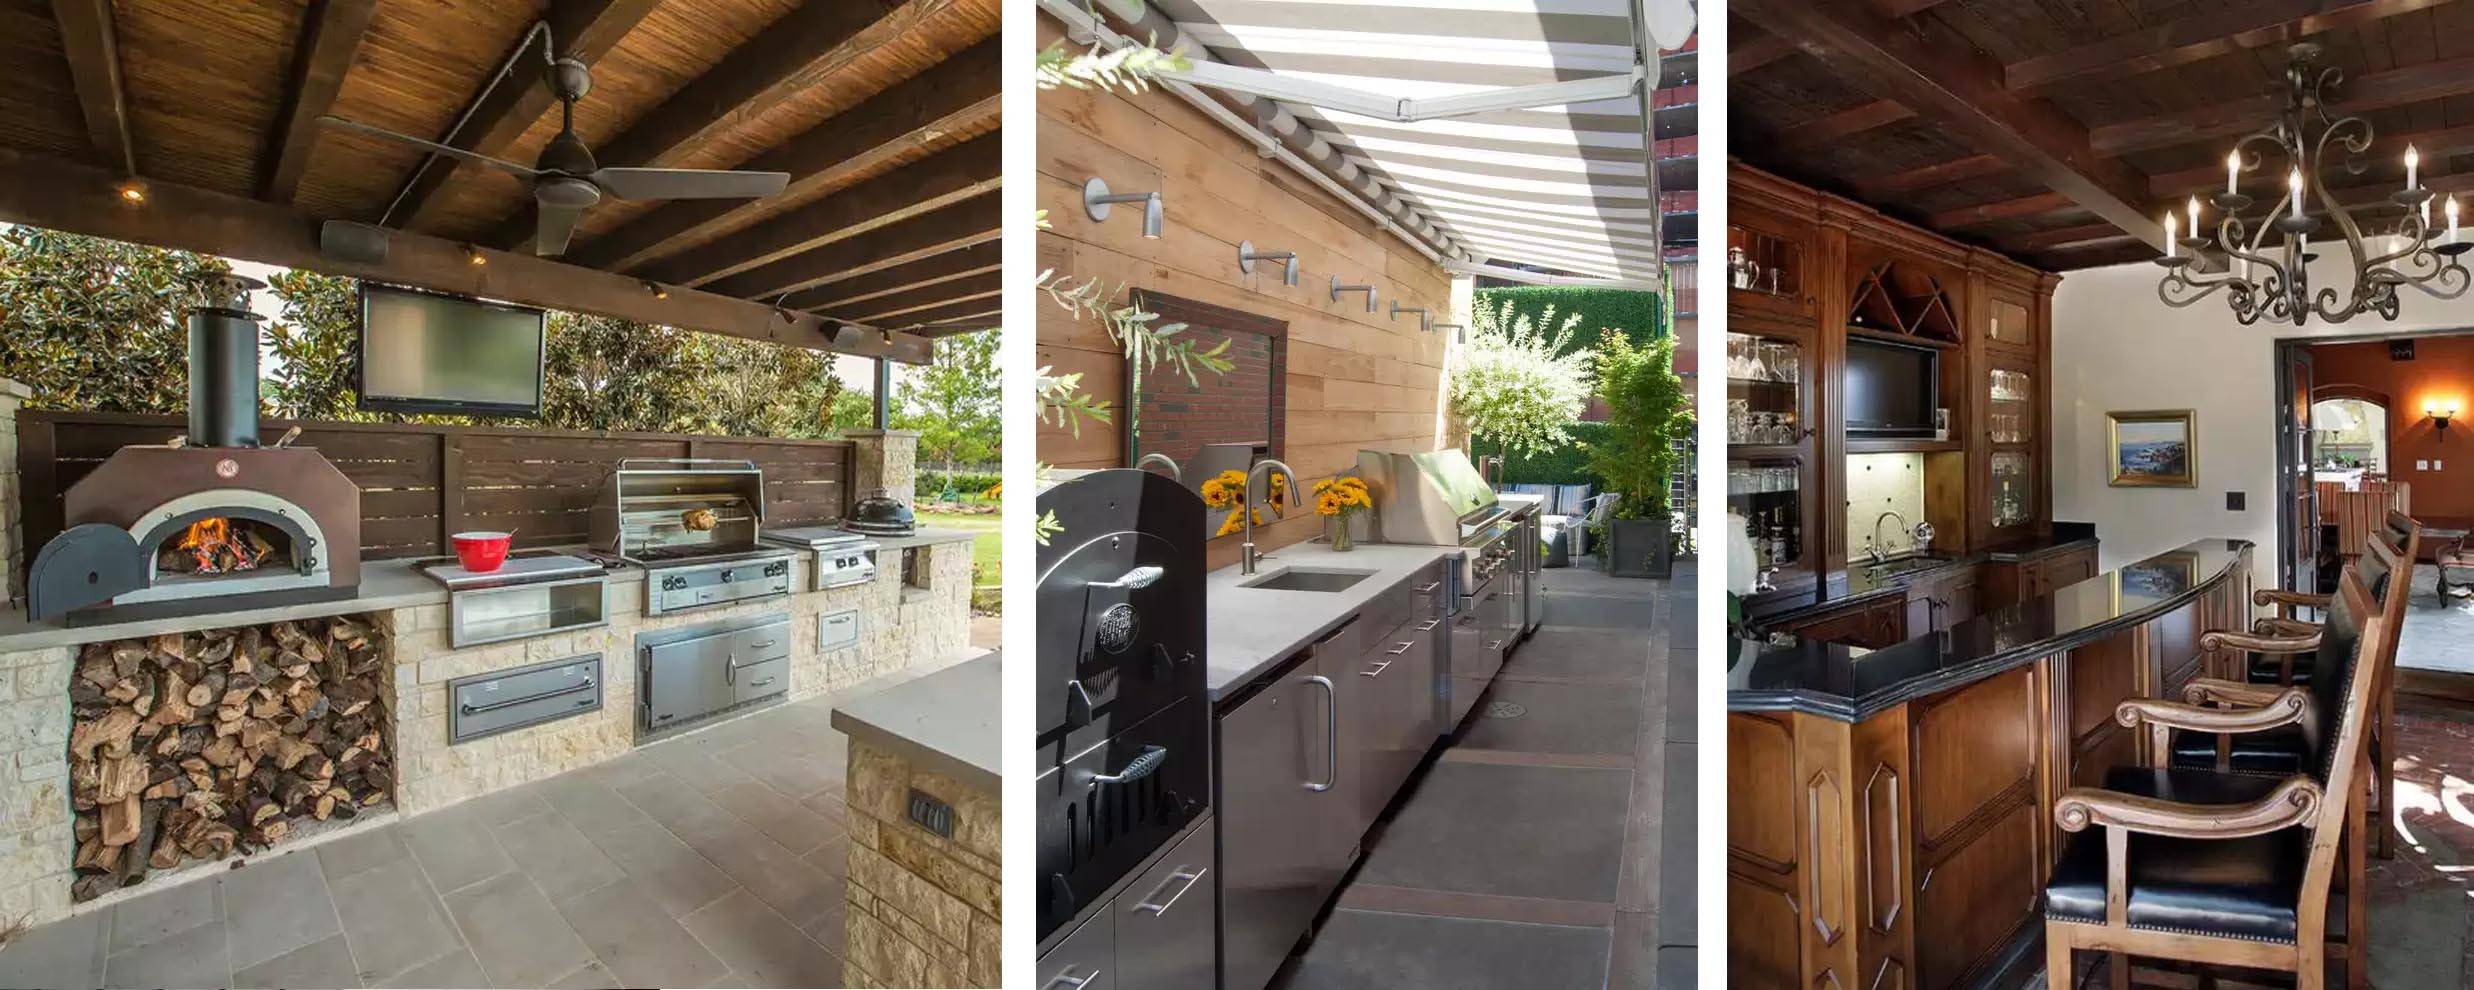 Outdoor Kitchen Bar
 Home Bars and Outdoor Kitchens for Your Florida Property